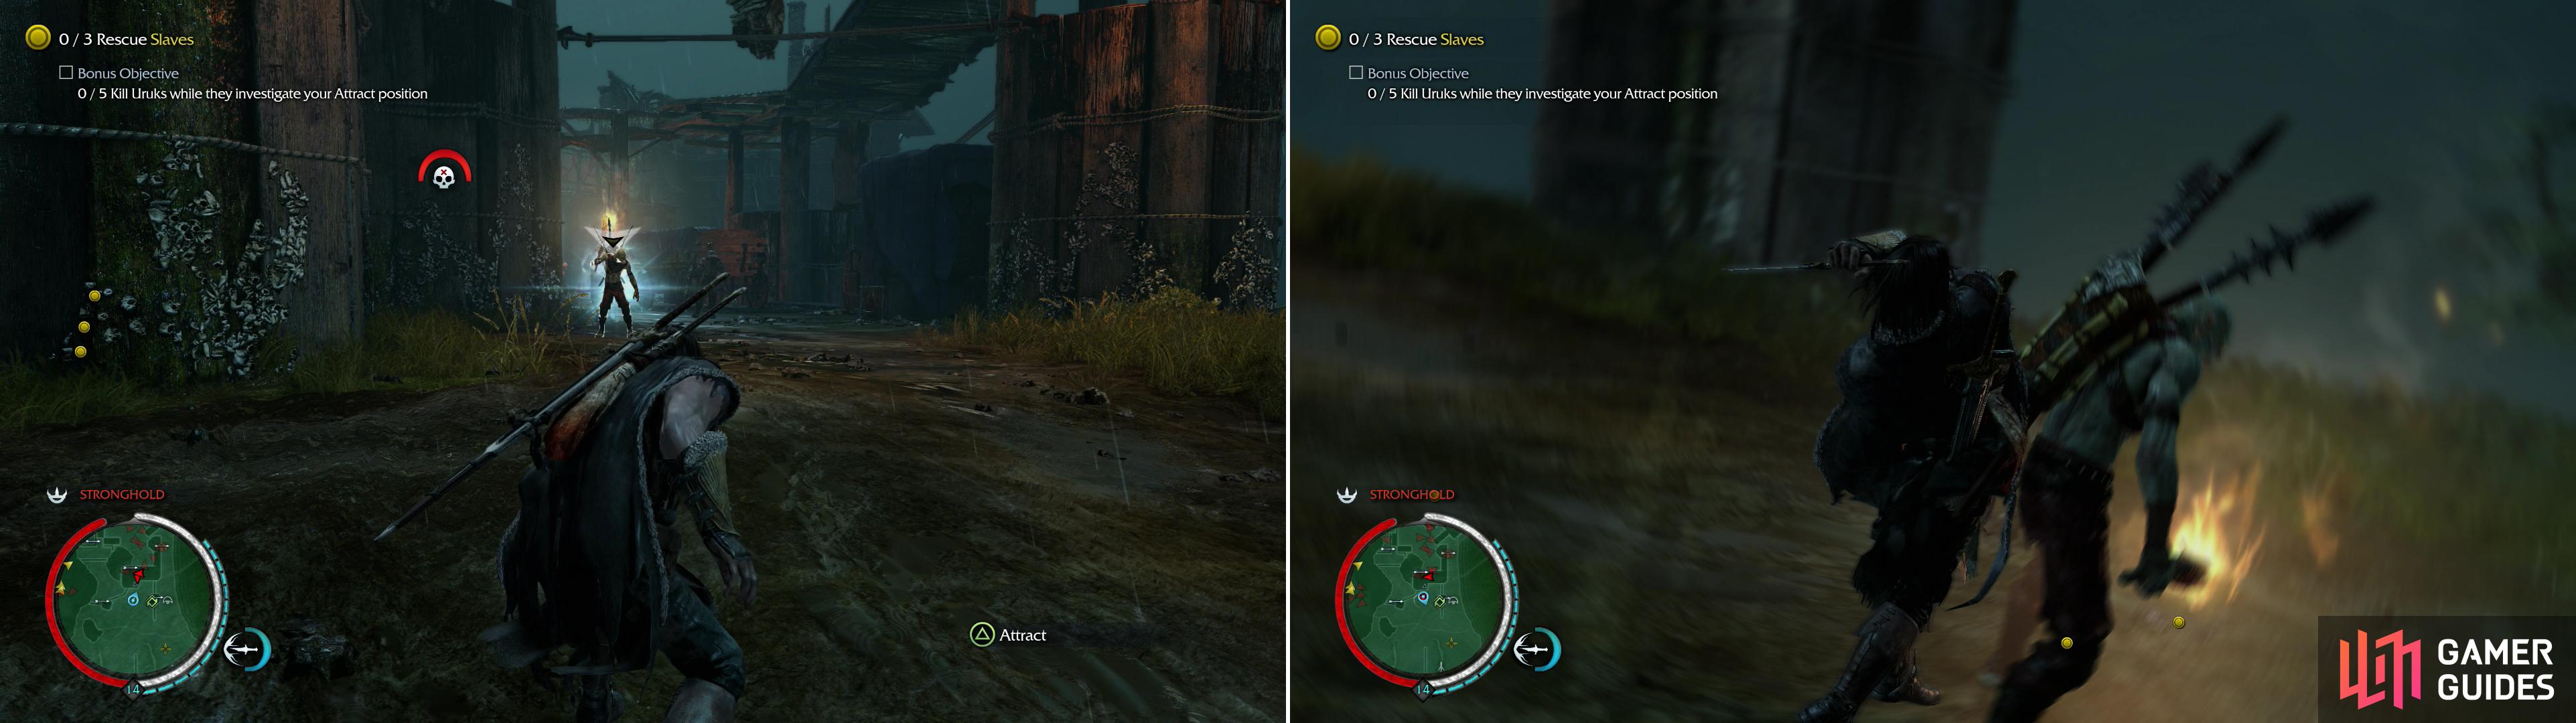 Use Attract to draw Uruks to your location (left) and while they move, position yourself to take advantage of them (right).